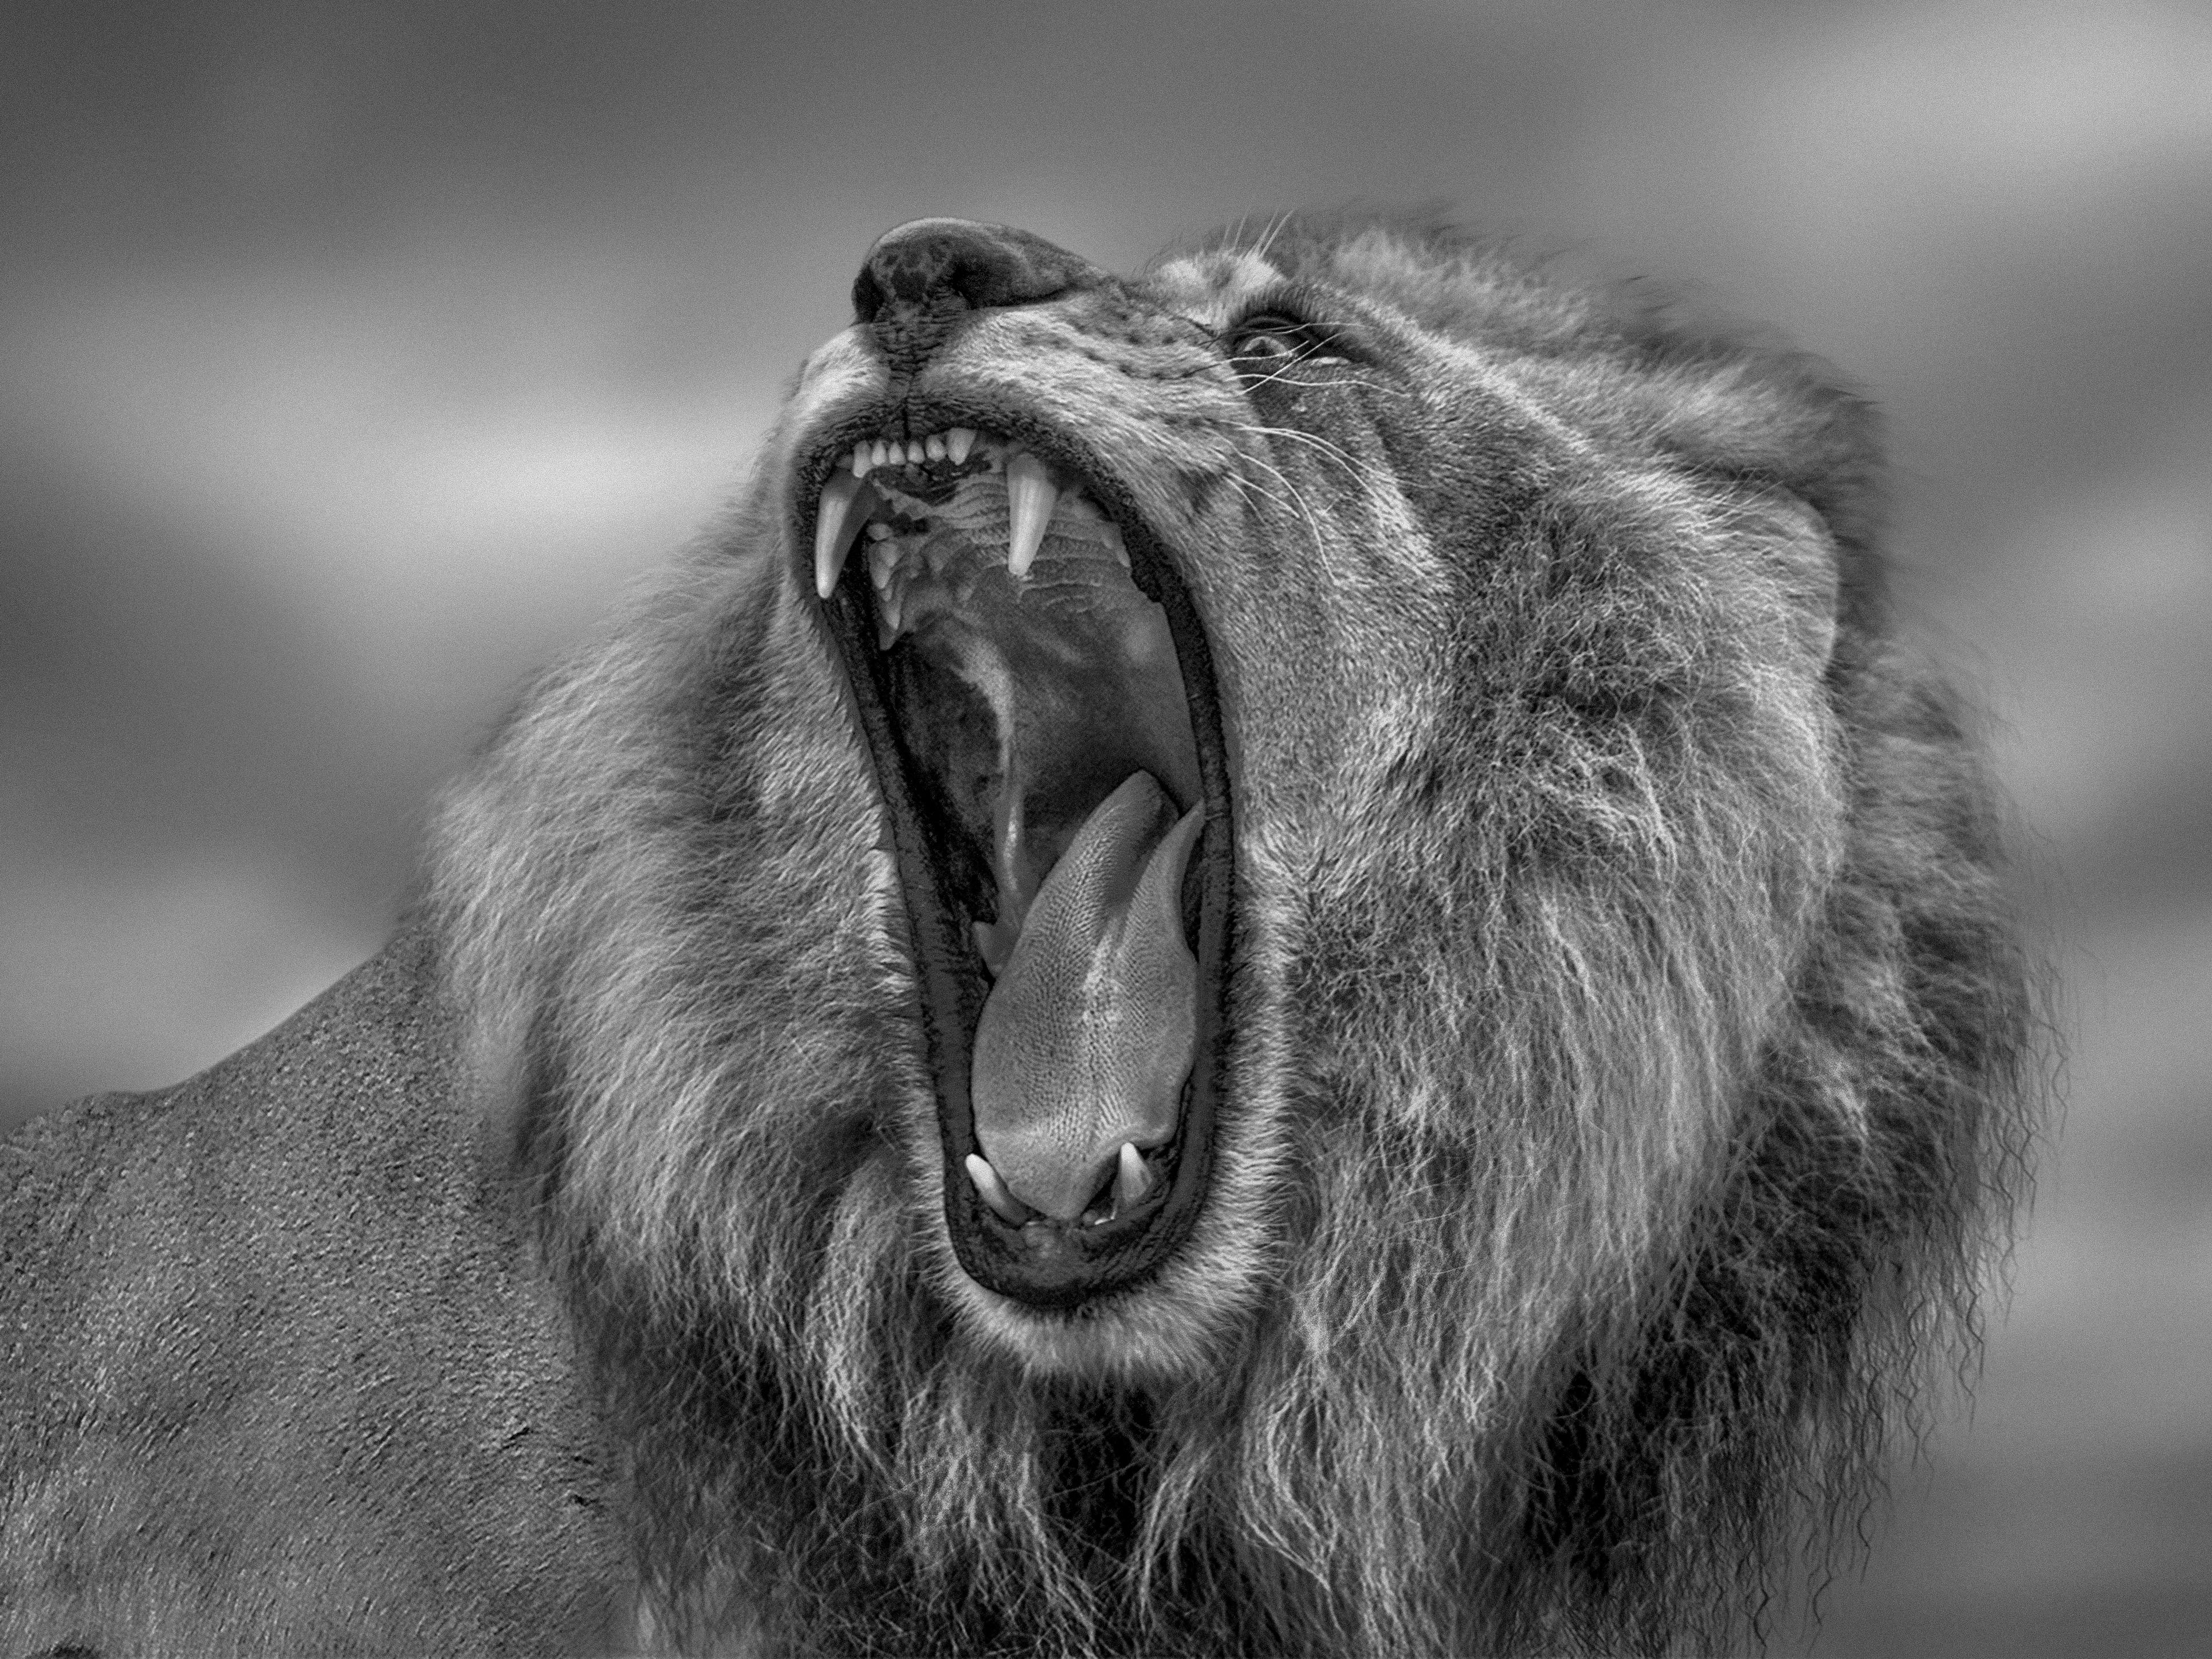 Shane Russeck Animal Print - "Roar" - 36x48 Black and White Lion Photography , Africa, Lion Photograph